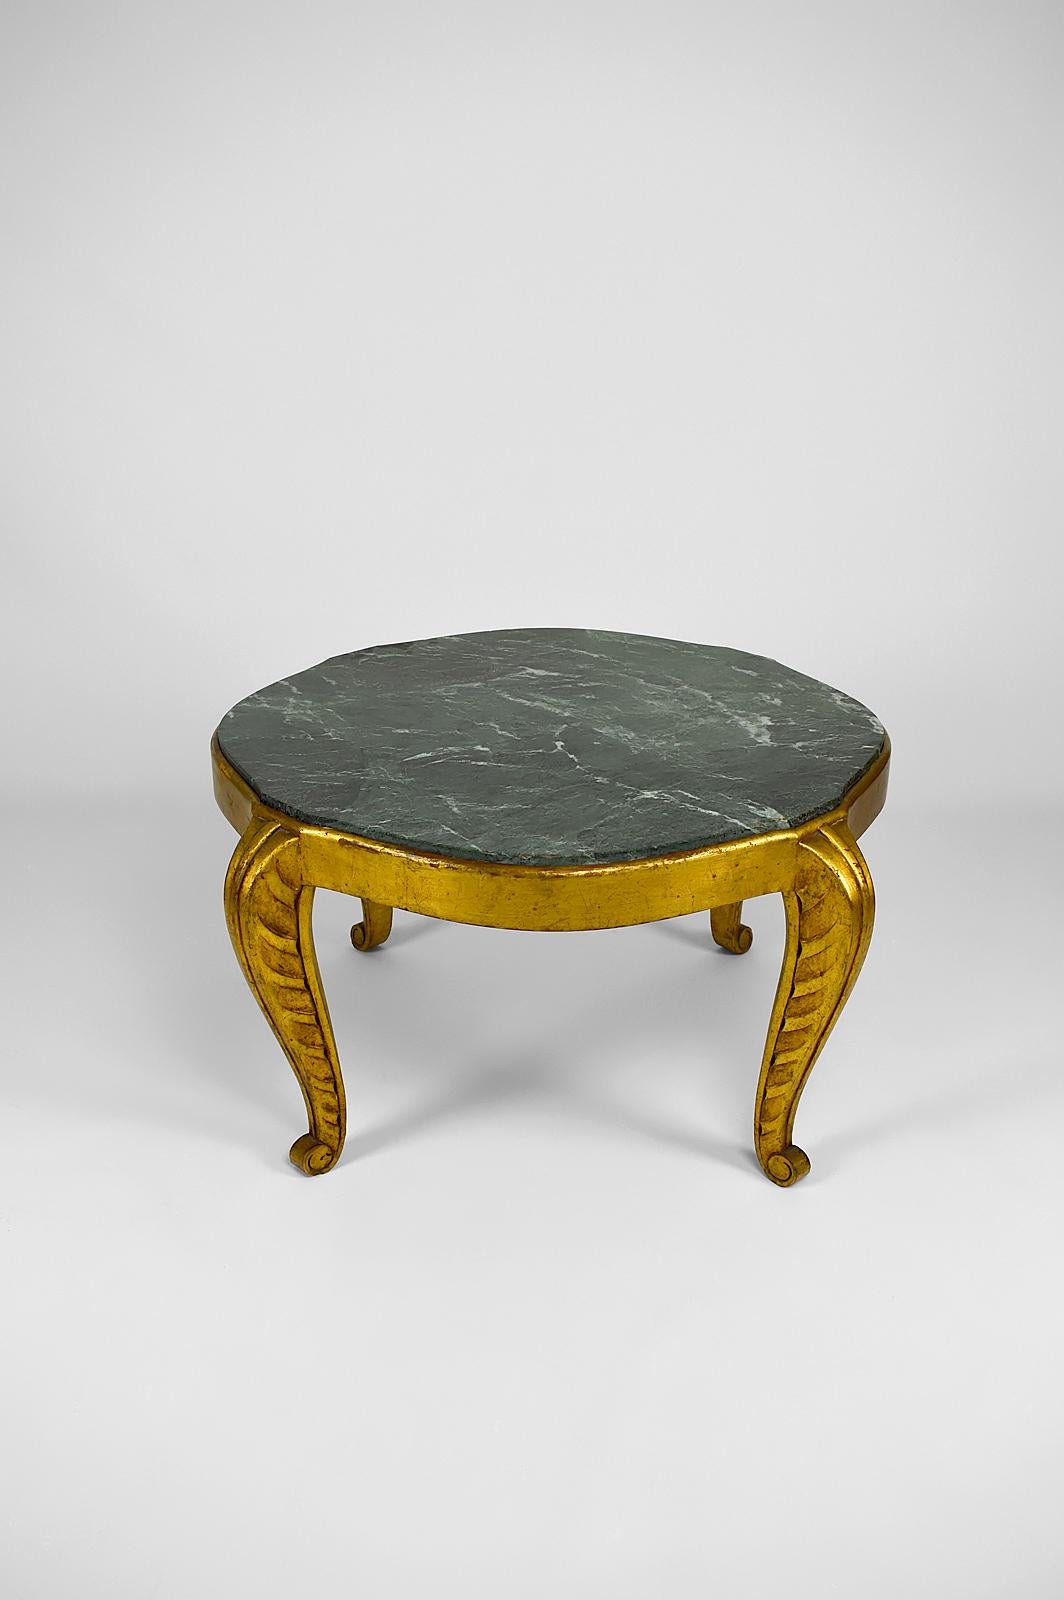 Gilded Side Table with Marble Top by Maison Jansen, Neoclassical Art Deco, 1940s For Sale 3